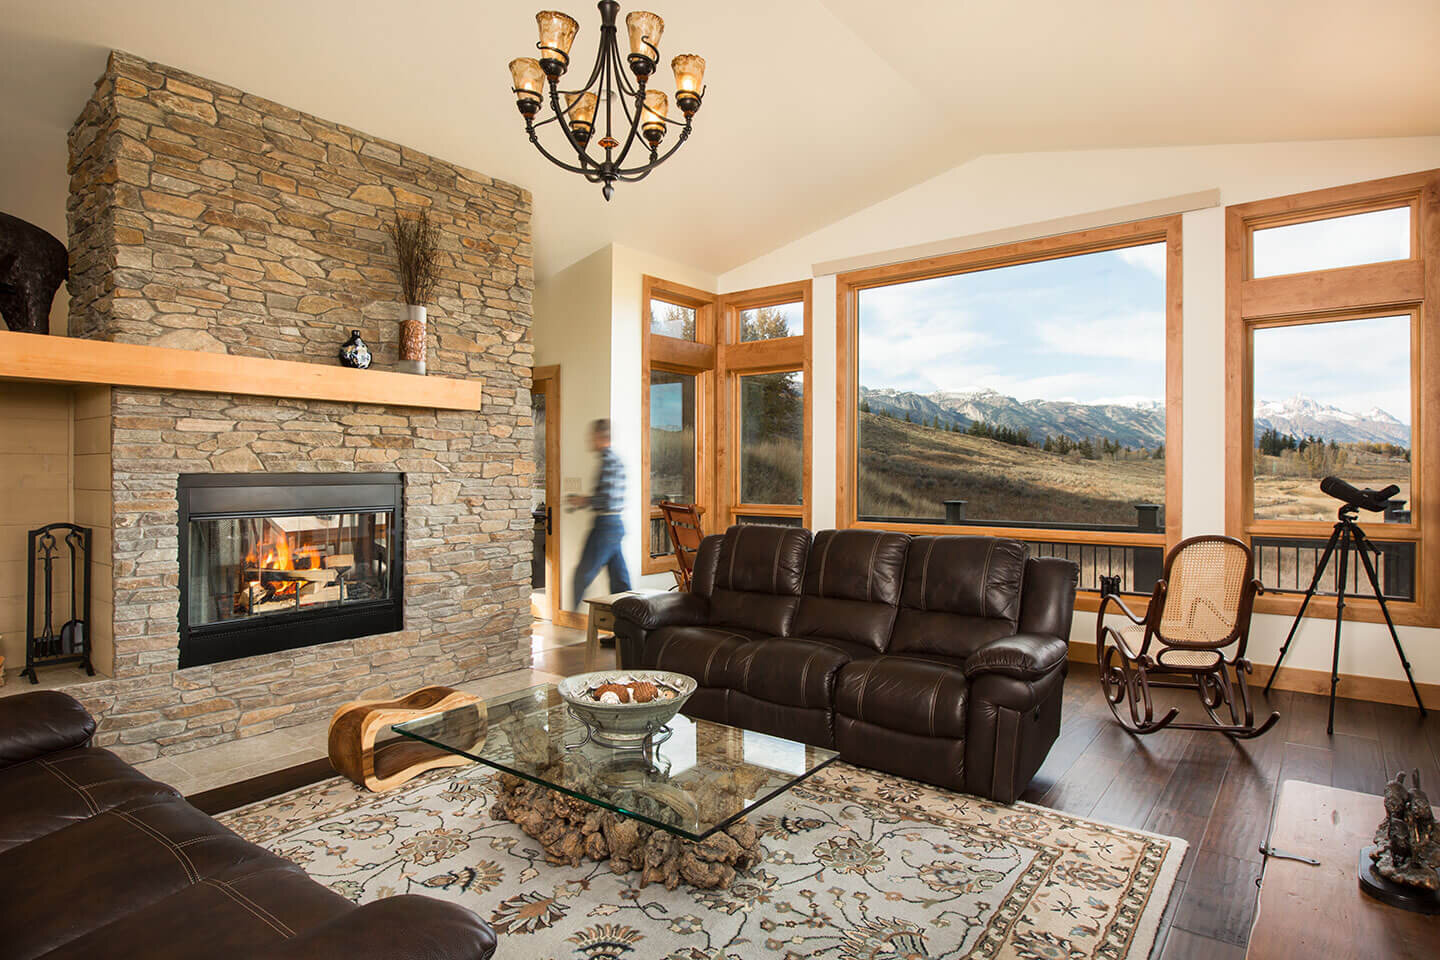 Living room with native stone fireplace